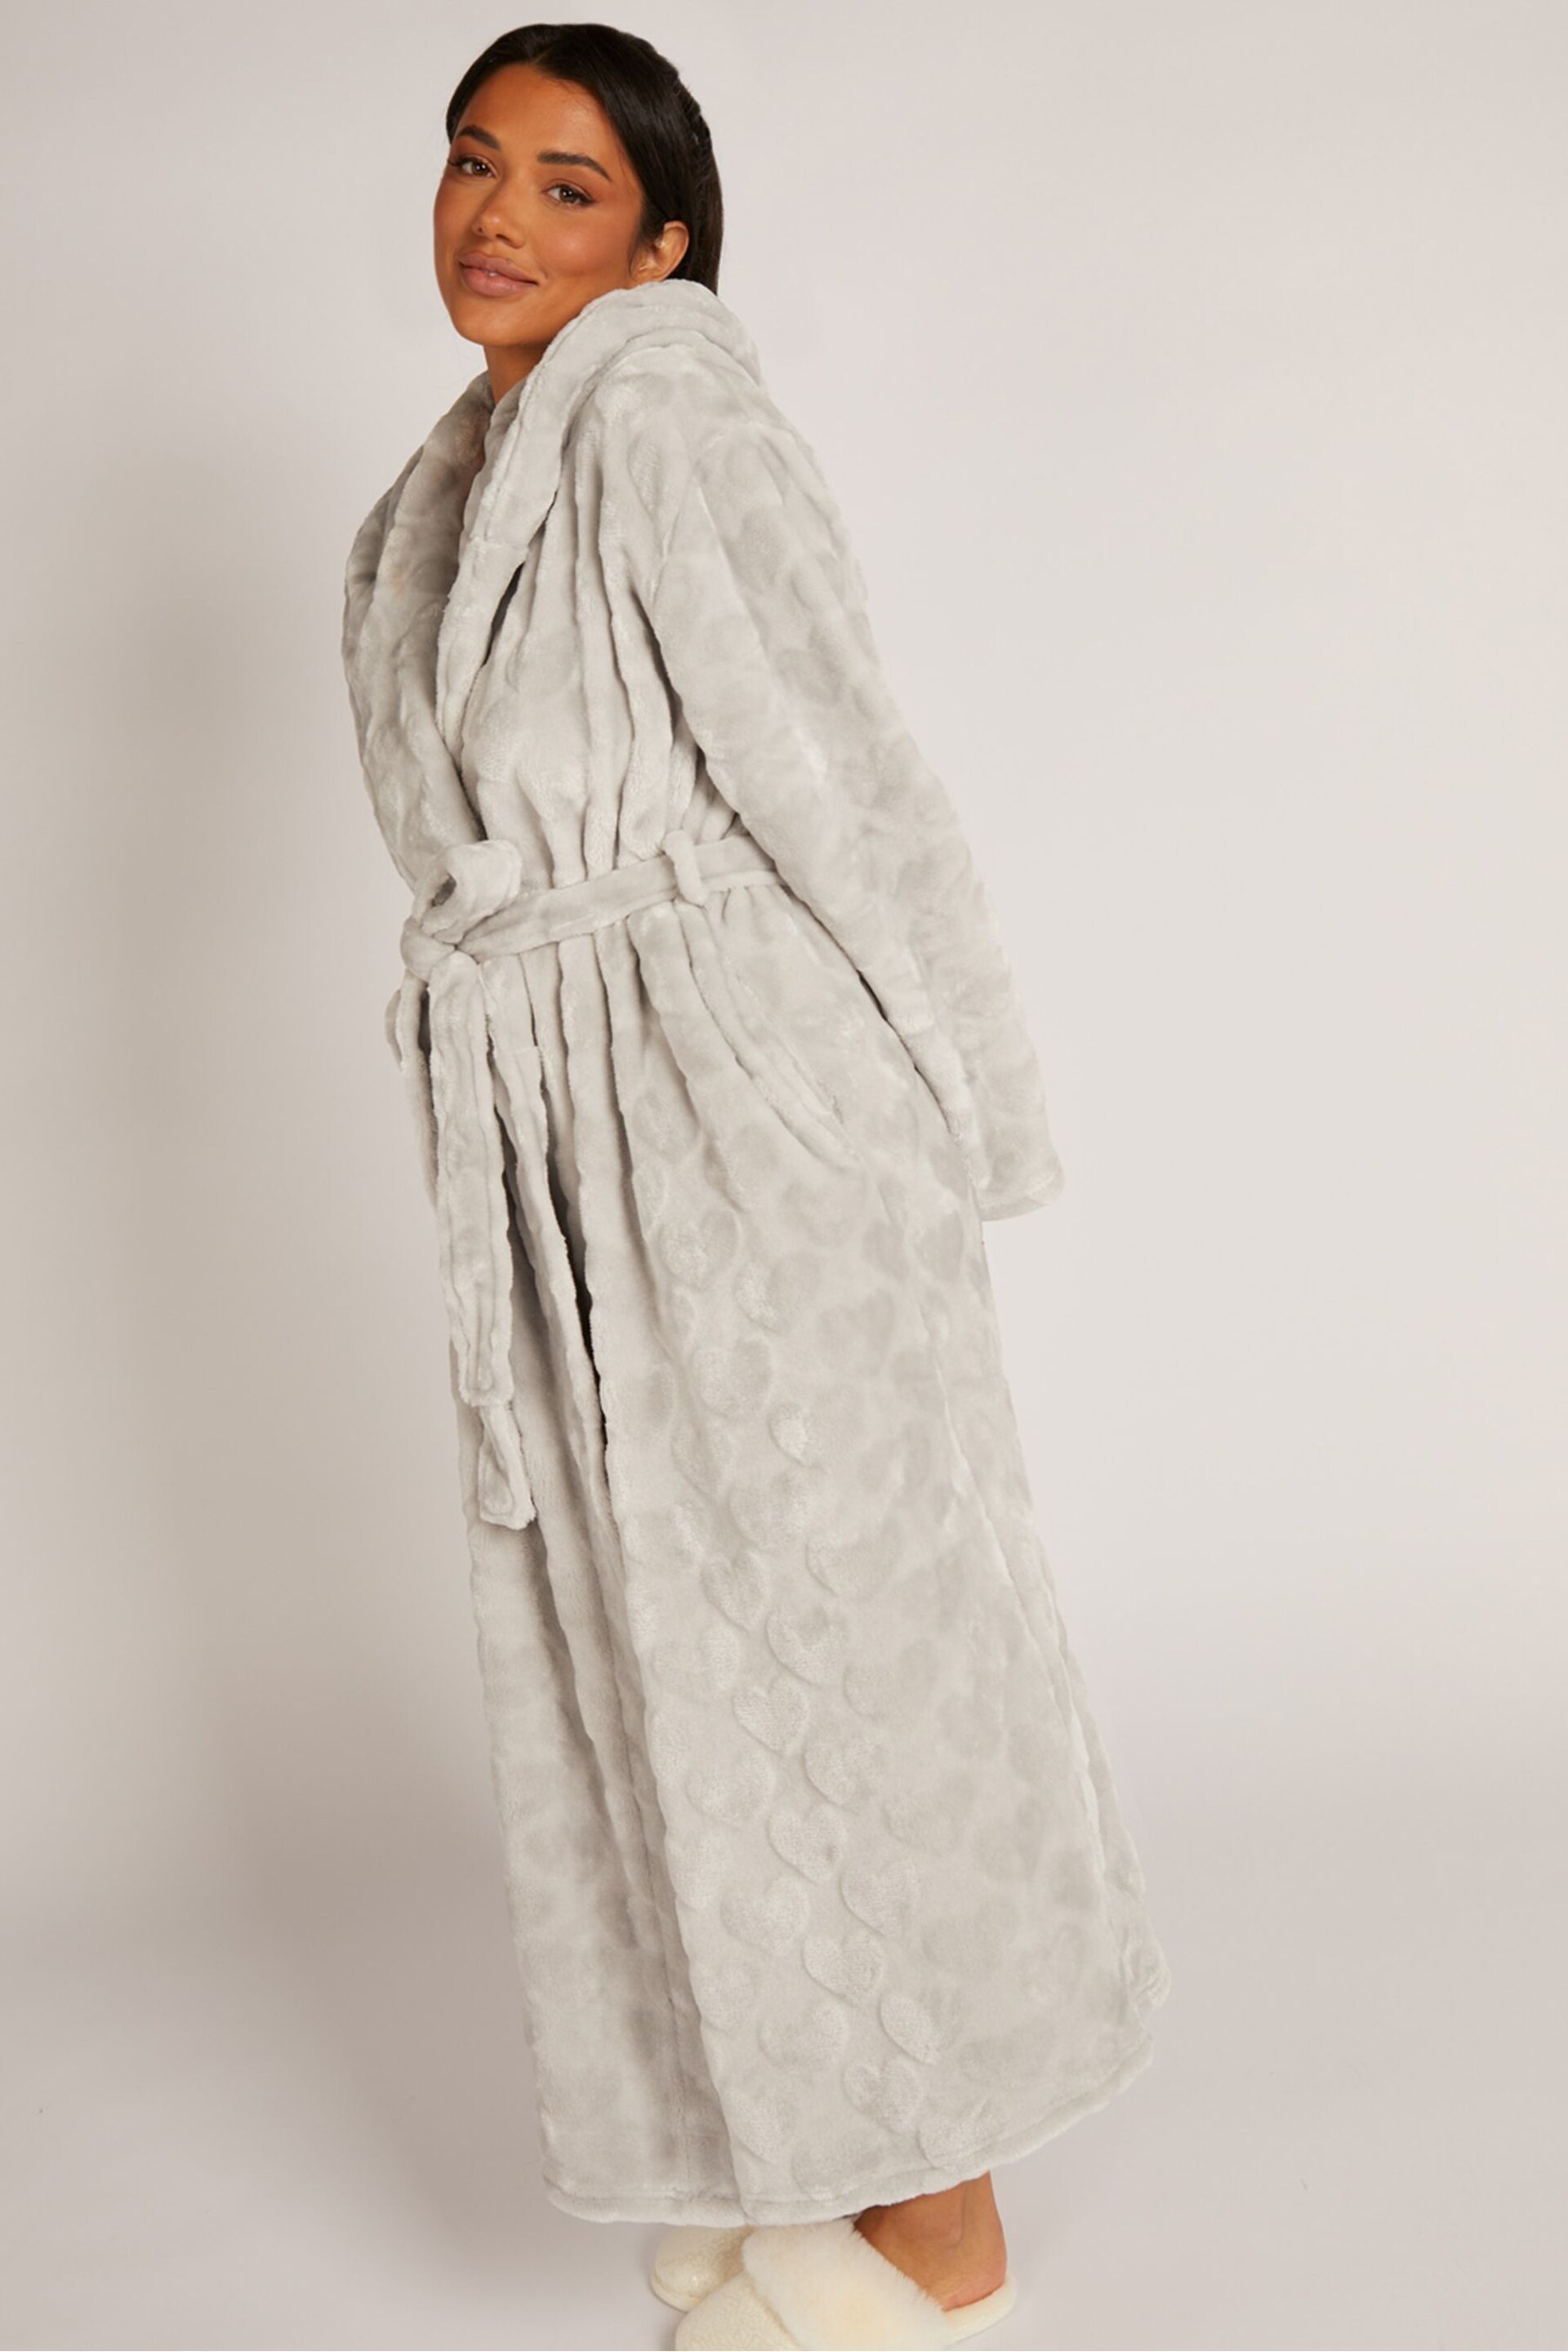 Boux Avenue Grey Heart Embossed Long Supersoft Robe Dressing Gown - Image 3 of 4